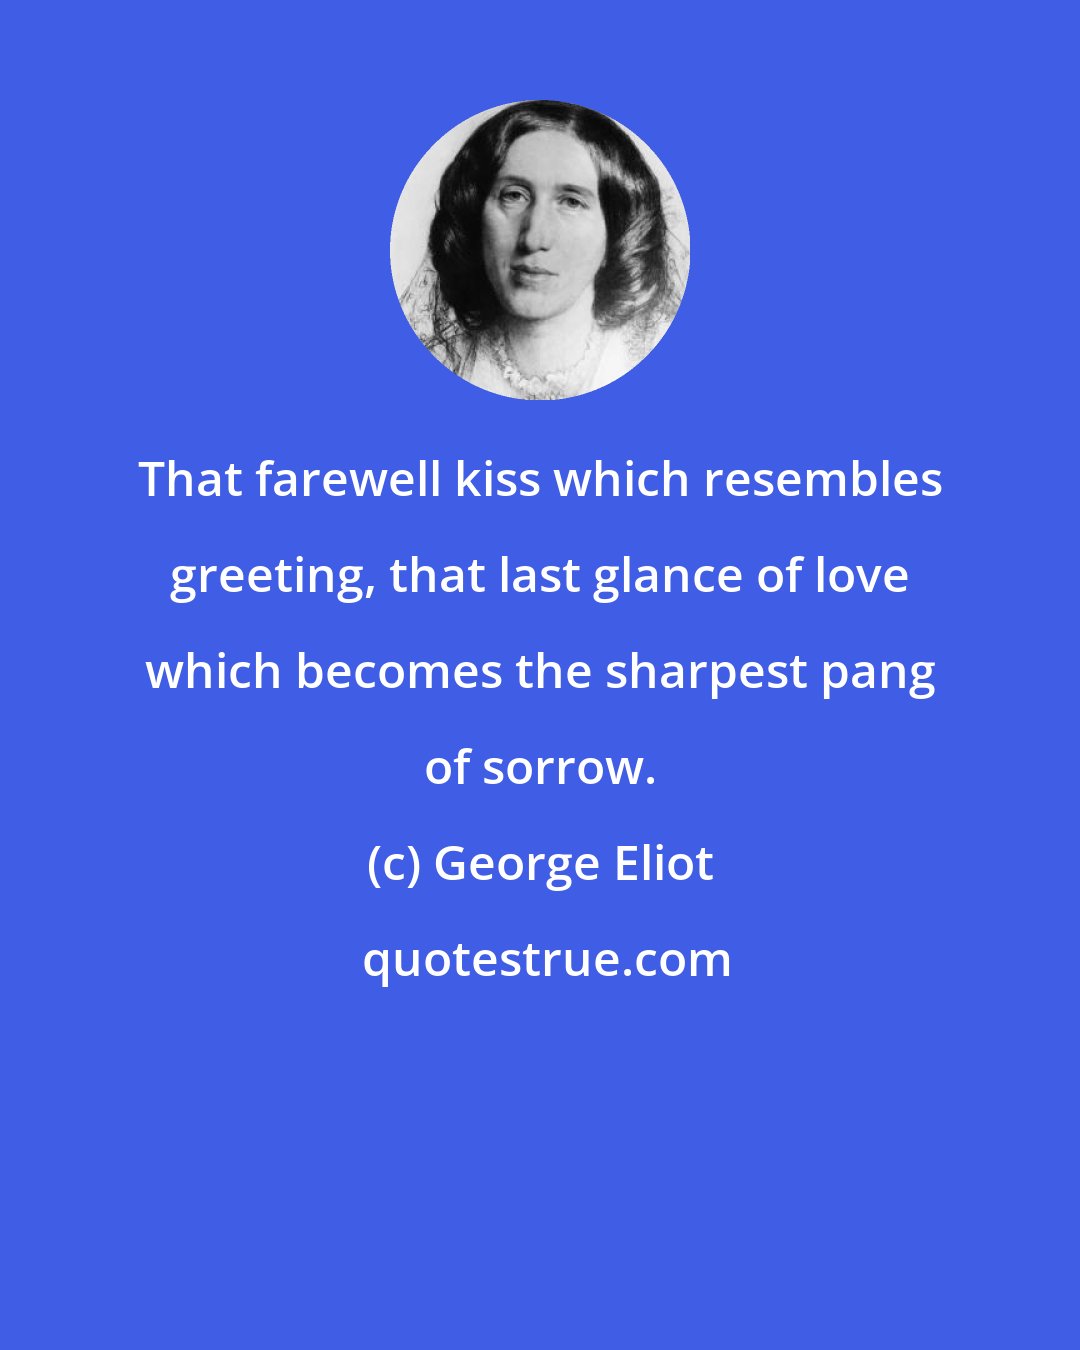 George Eliot: That farewell kiss which resembles greeting, that last glance of love which becomes the sharpest pang of sorrow.